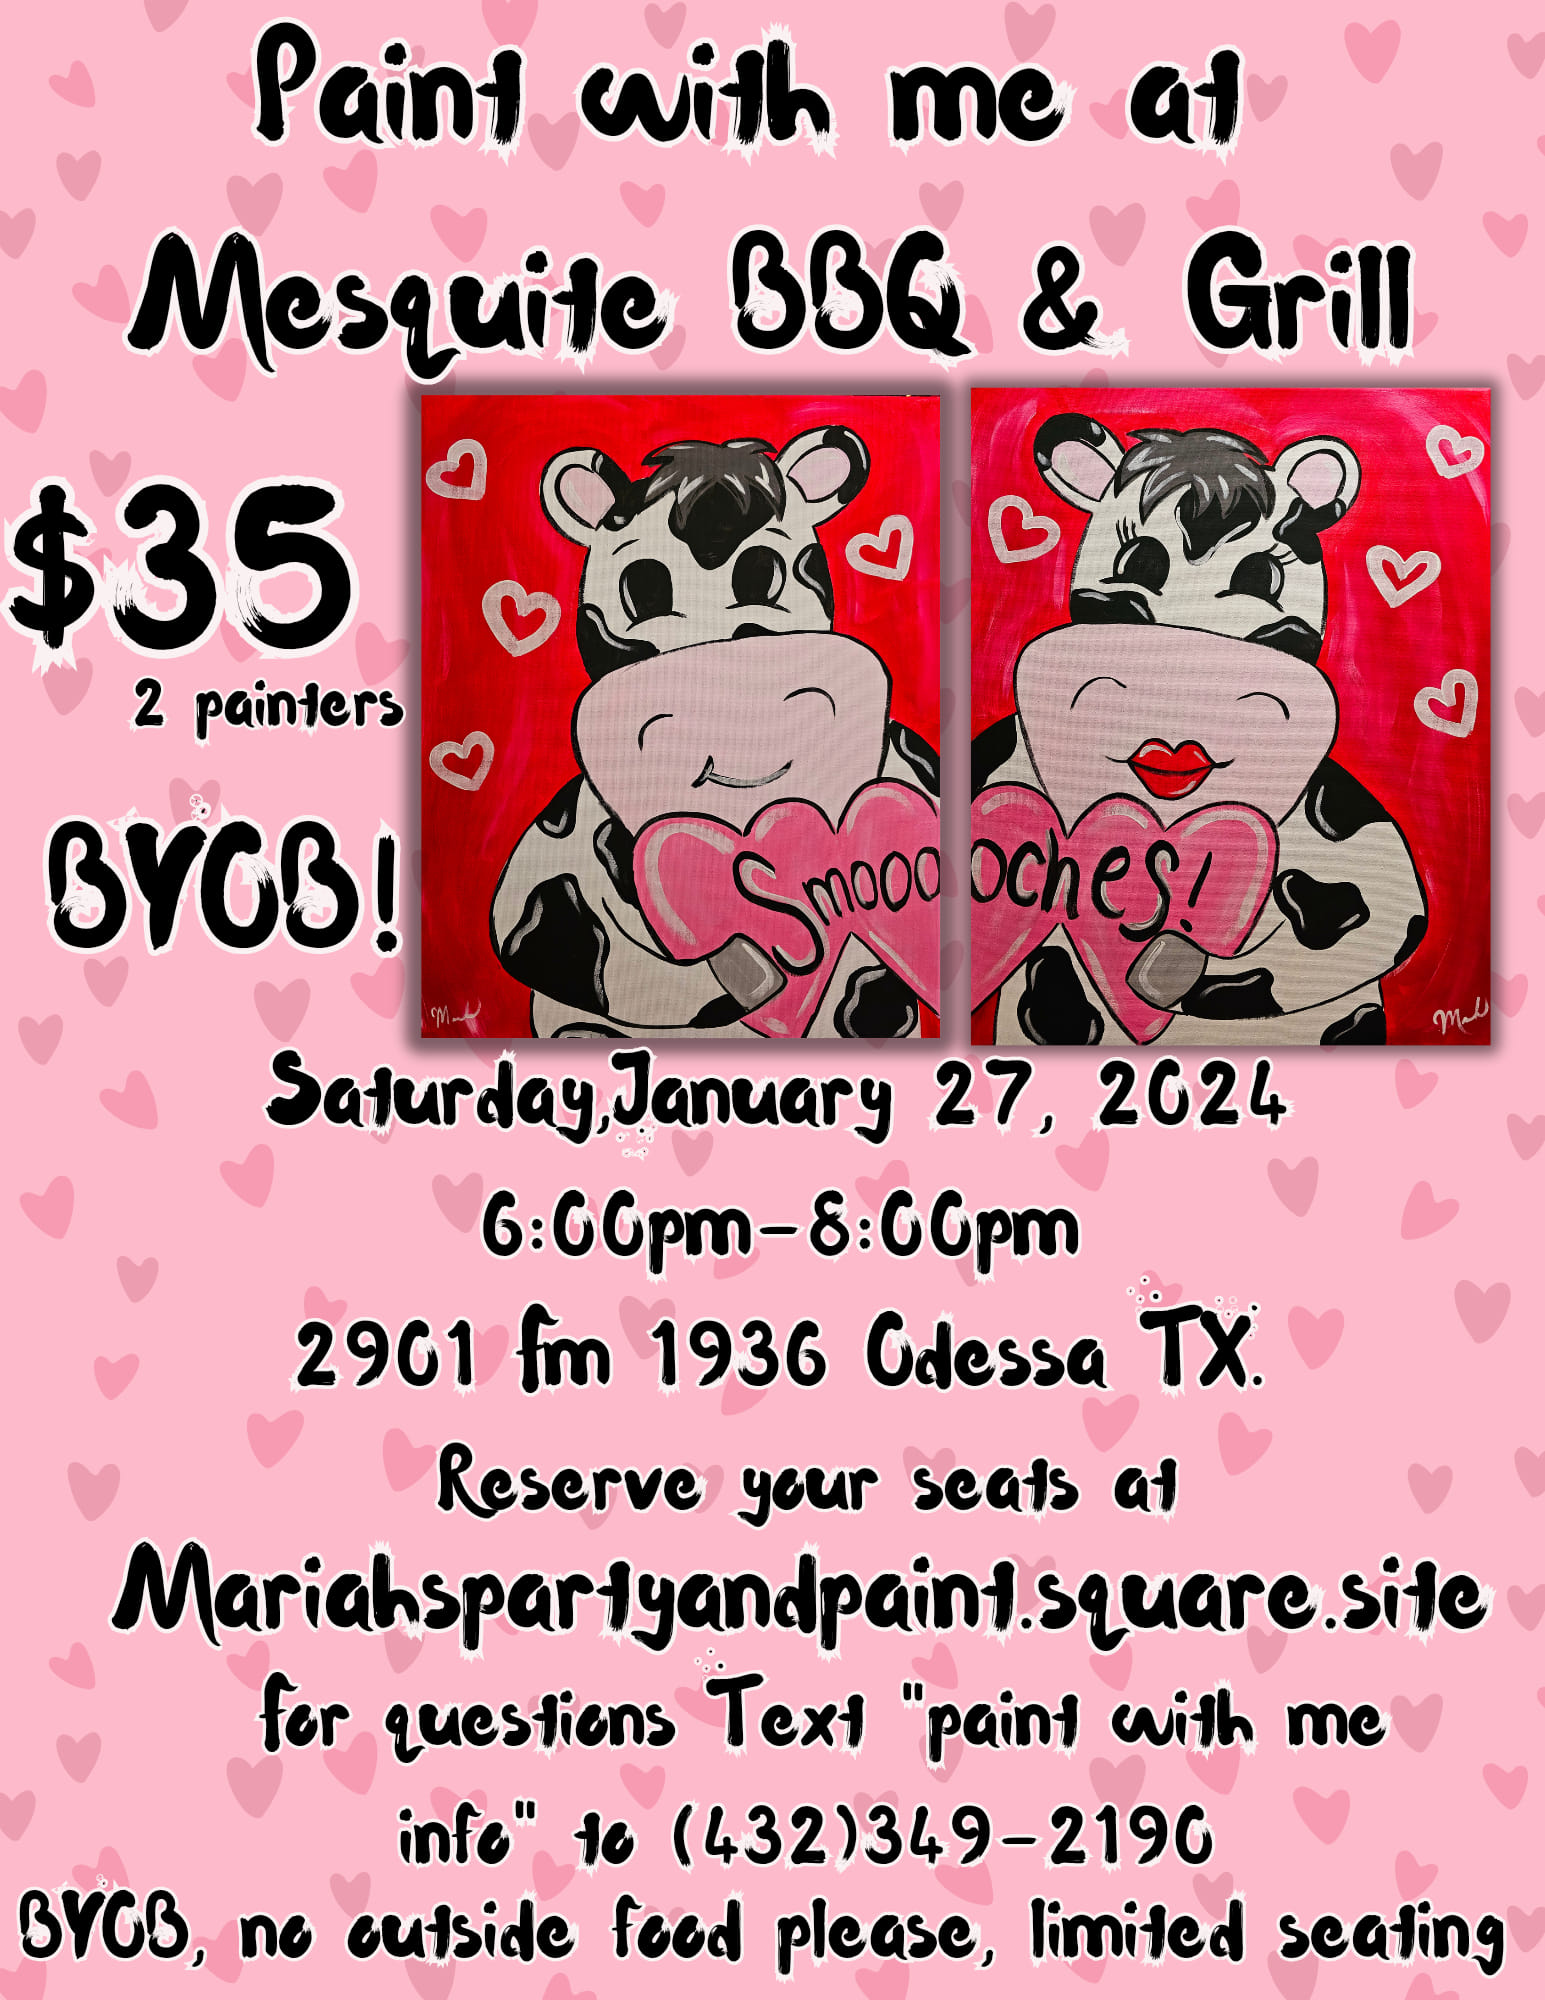 Valentines Cow Painting Class at Mesquite BBQ & Grill in Odessa, TX on January 27, 2024